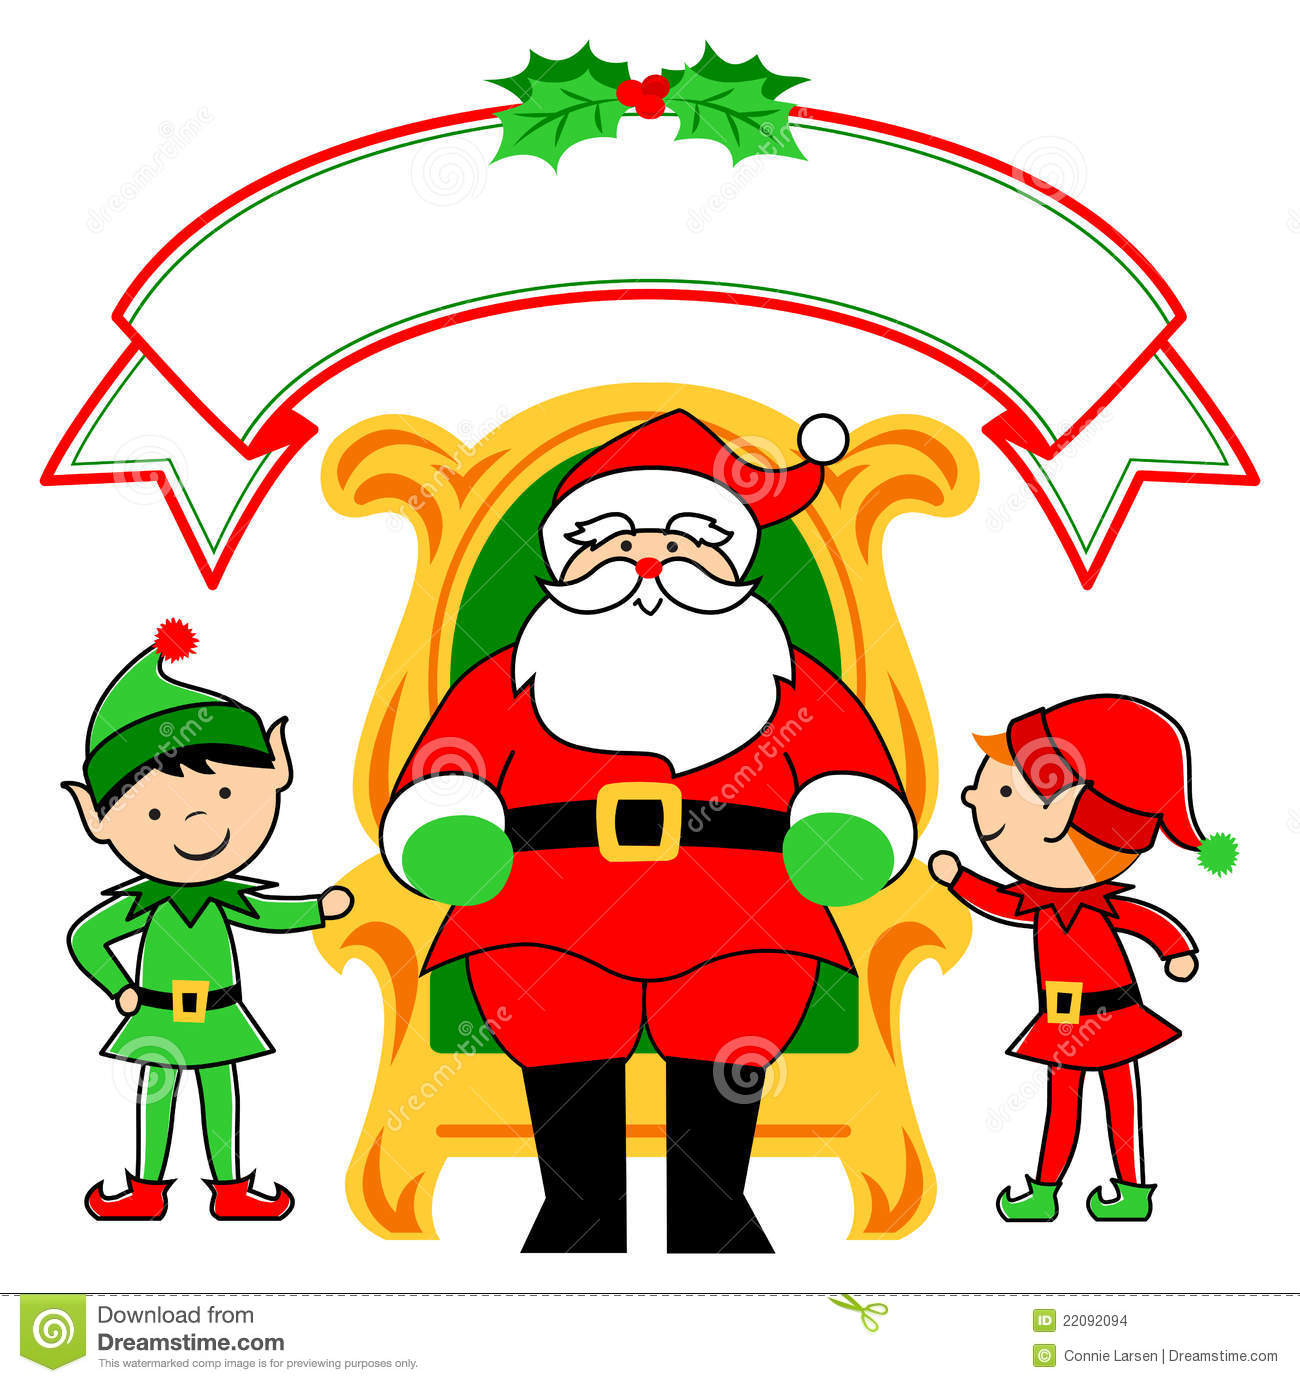 Santa Is Sitting On His Throne With His Christmas Elves In Attendance